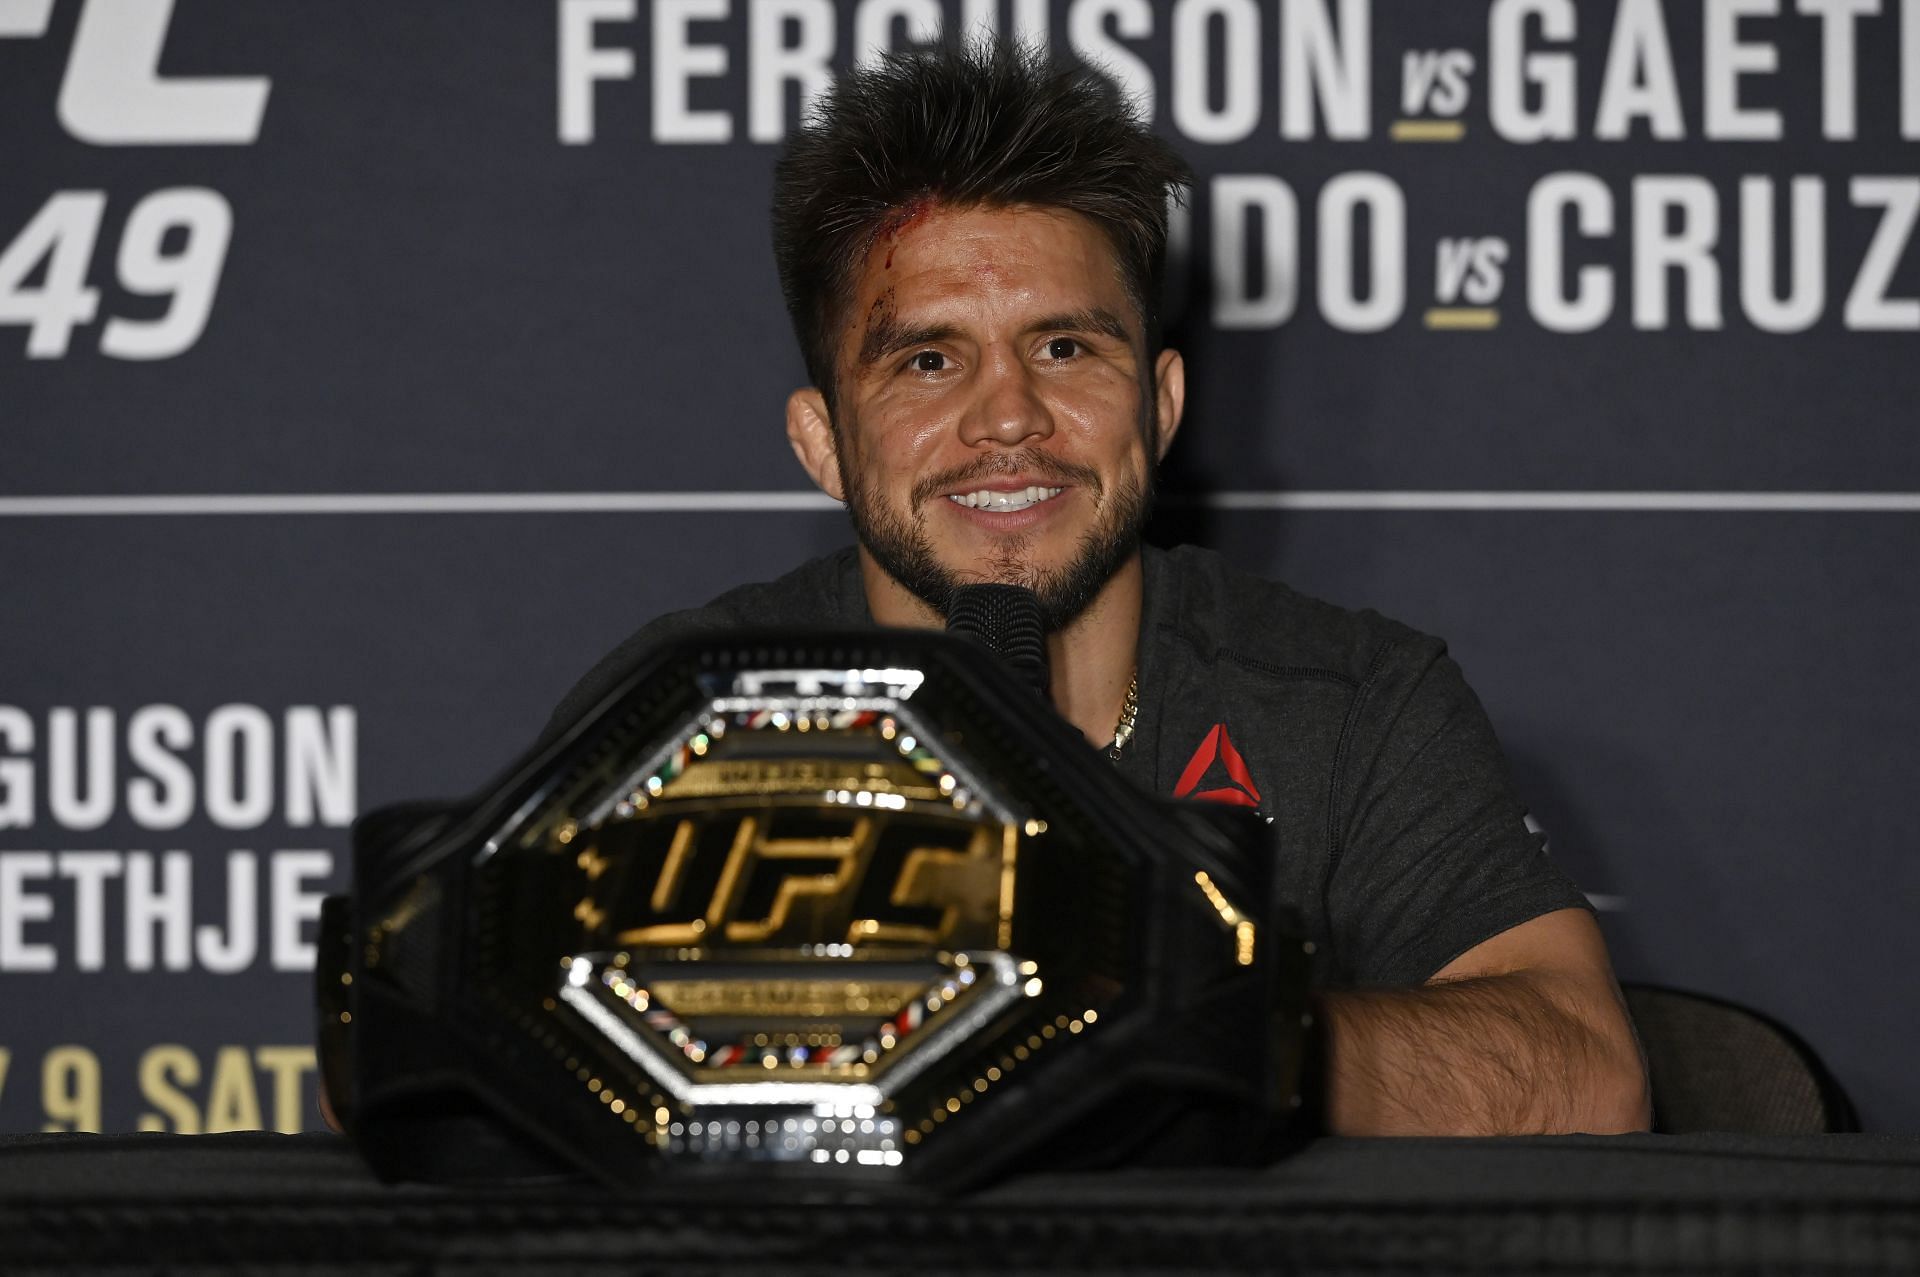 Did Henry Cejudo hang up his gloves too early to be considered a legend?